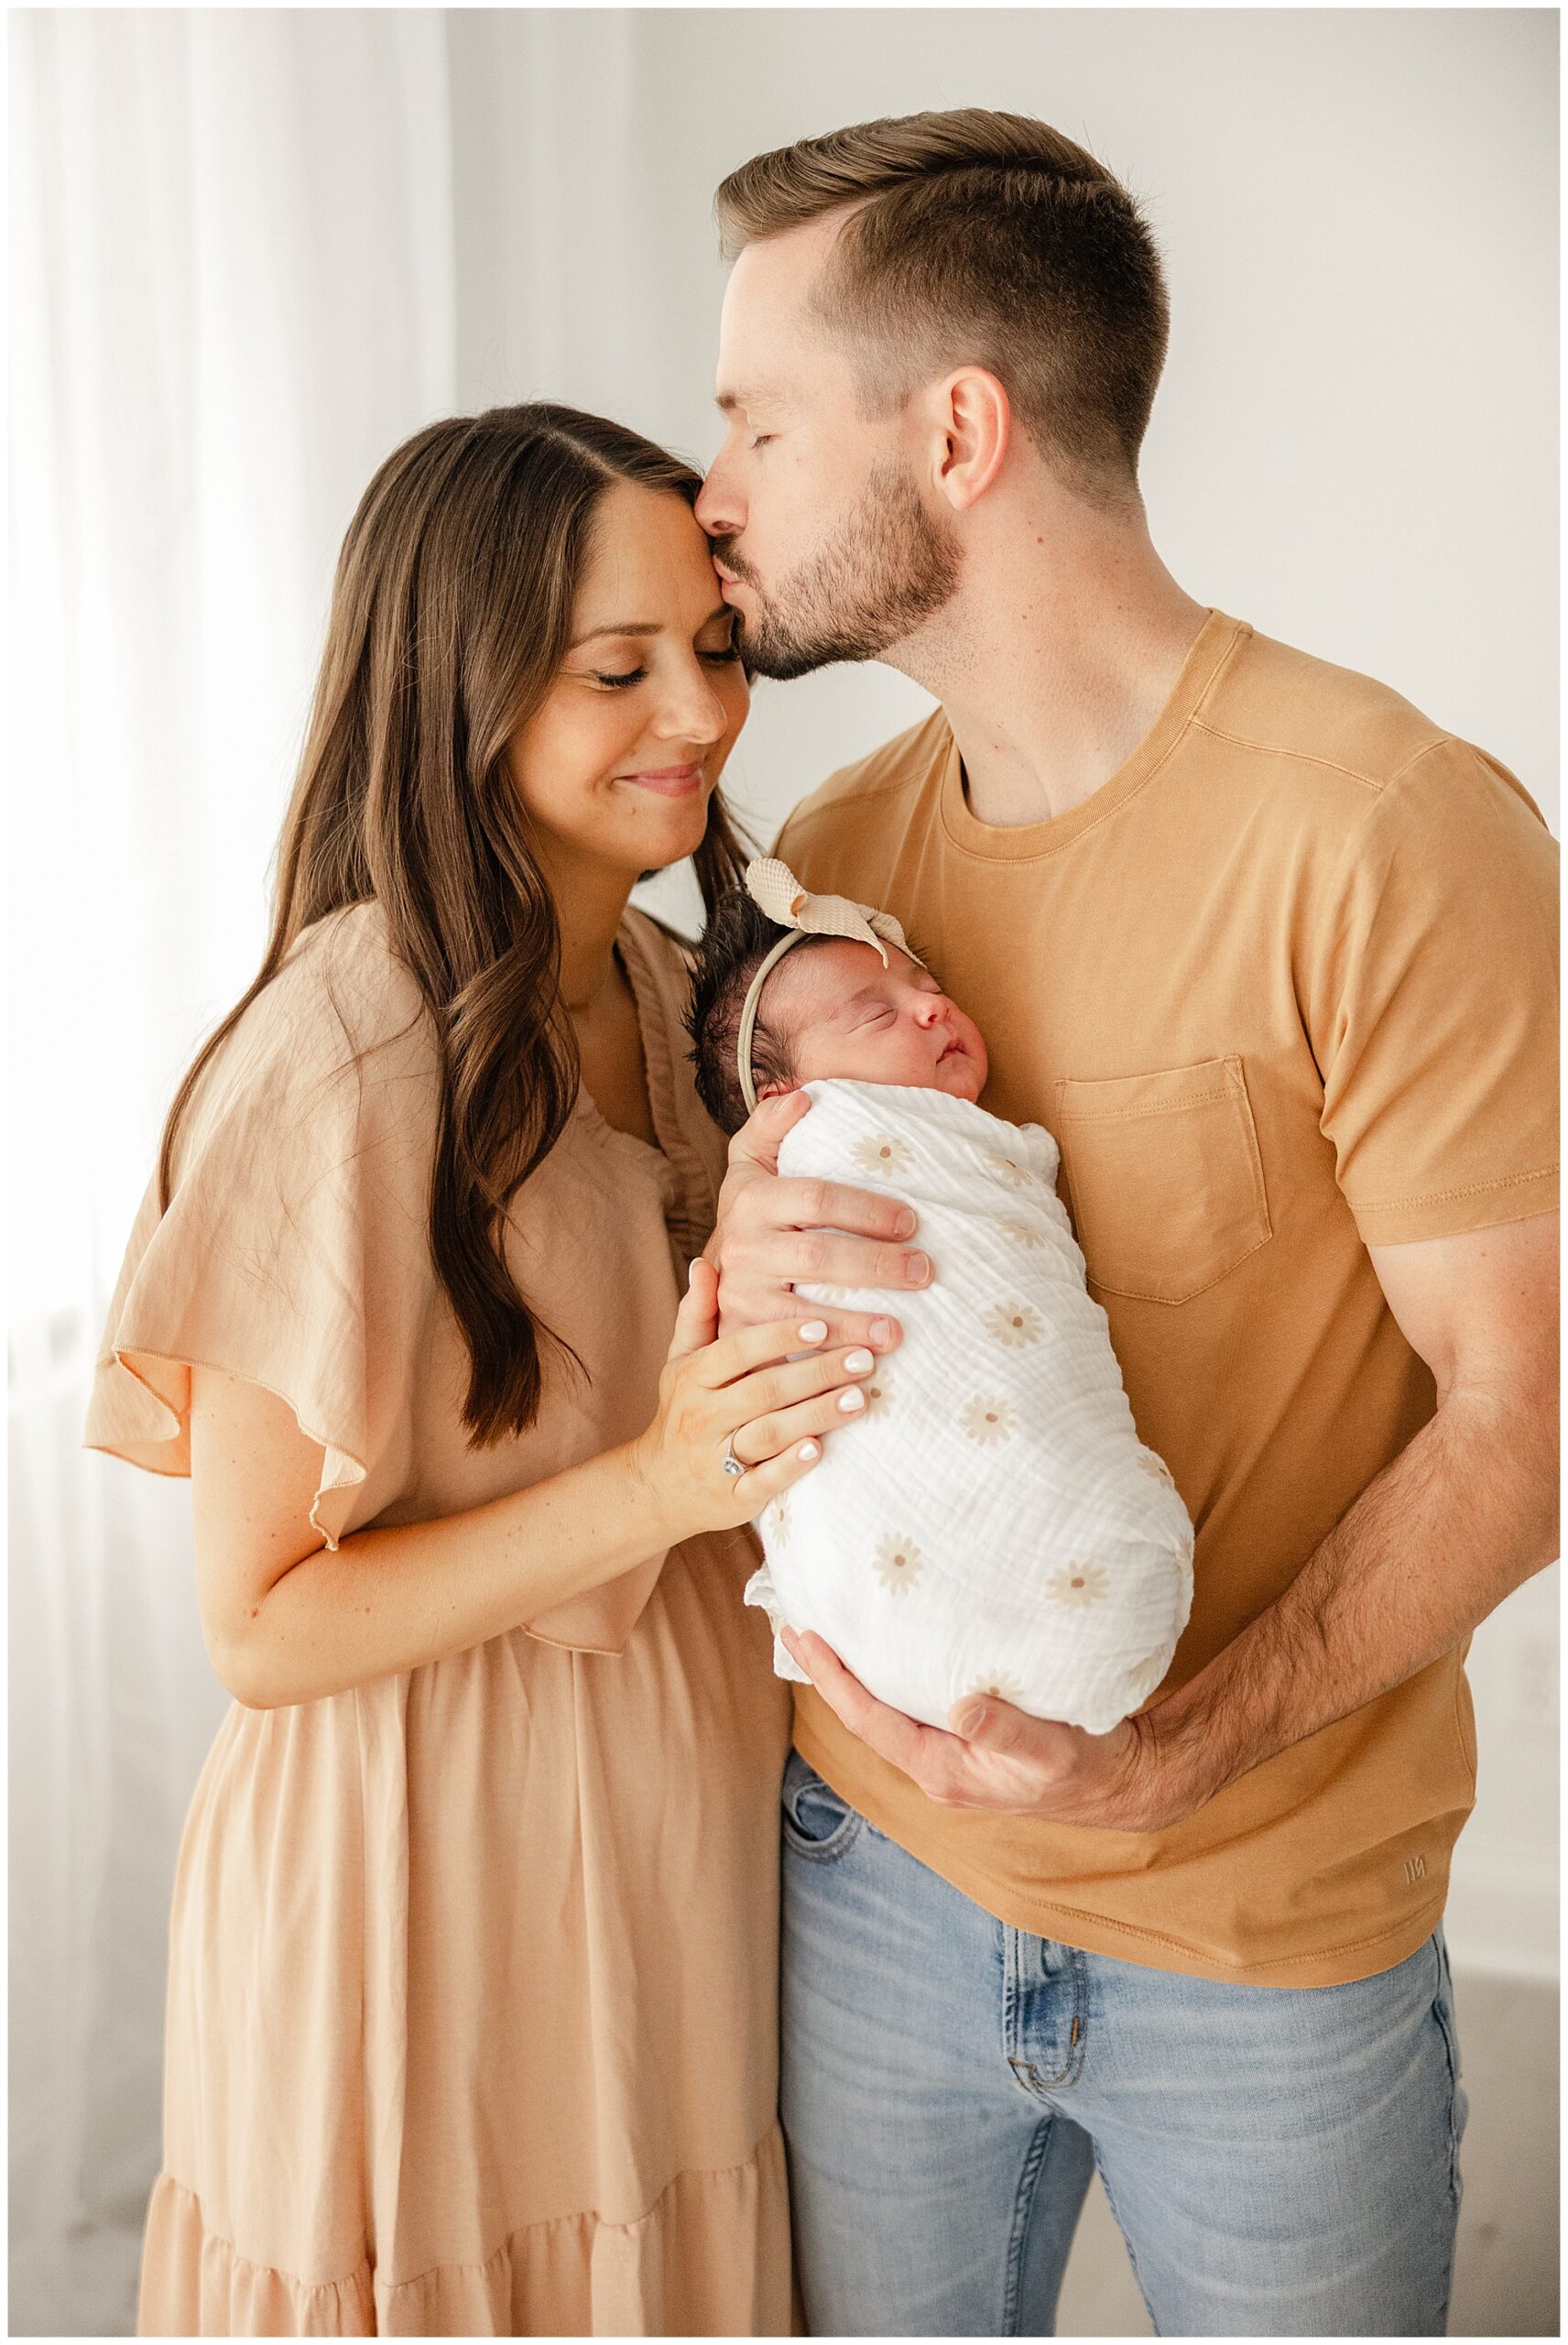 dad holding newborn baby and kissing mom's forehead